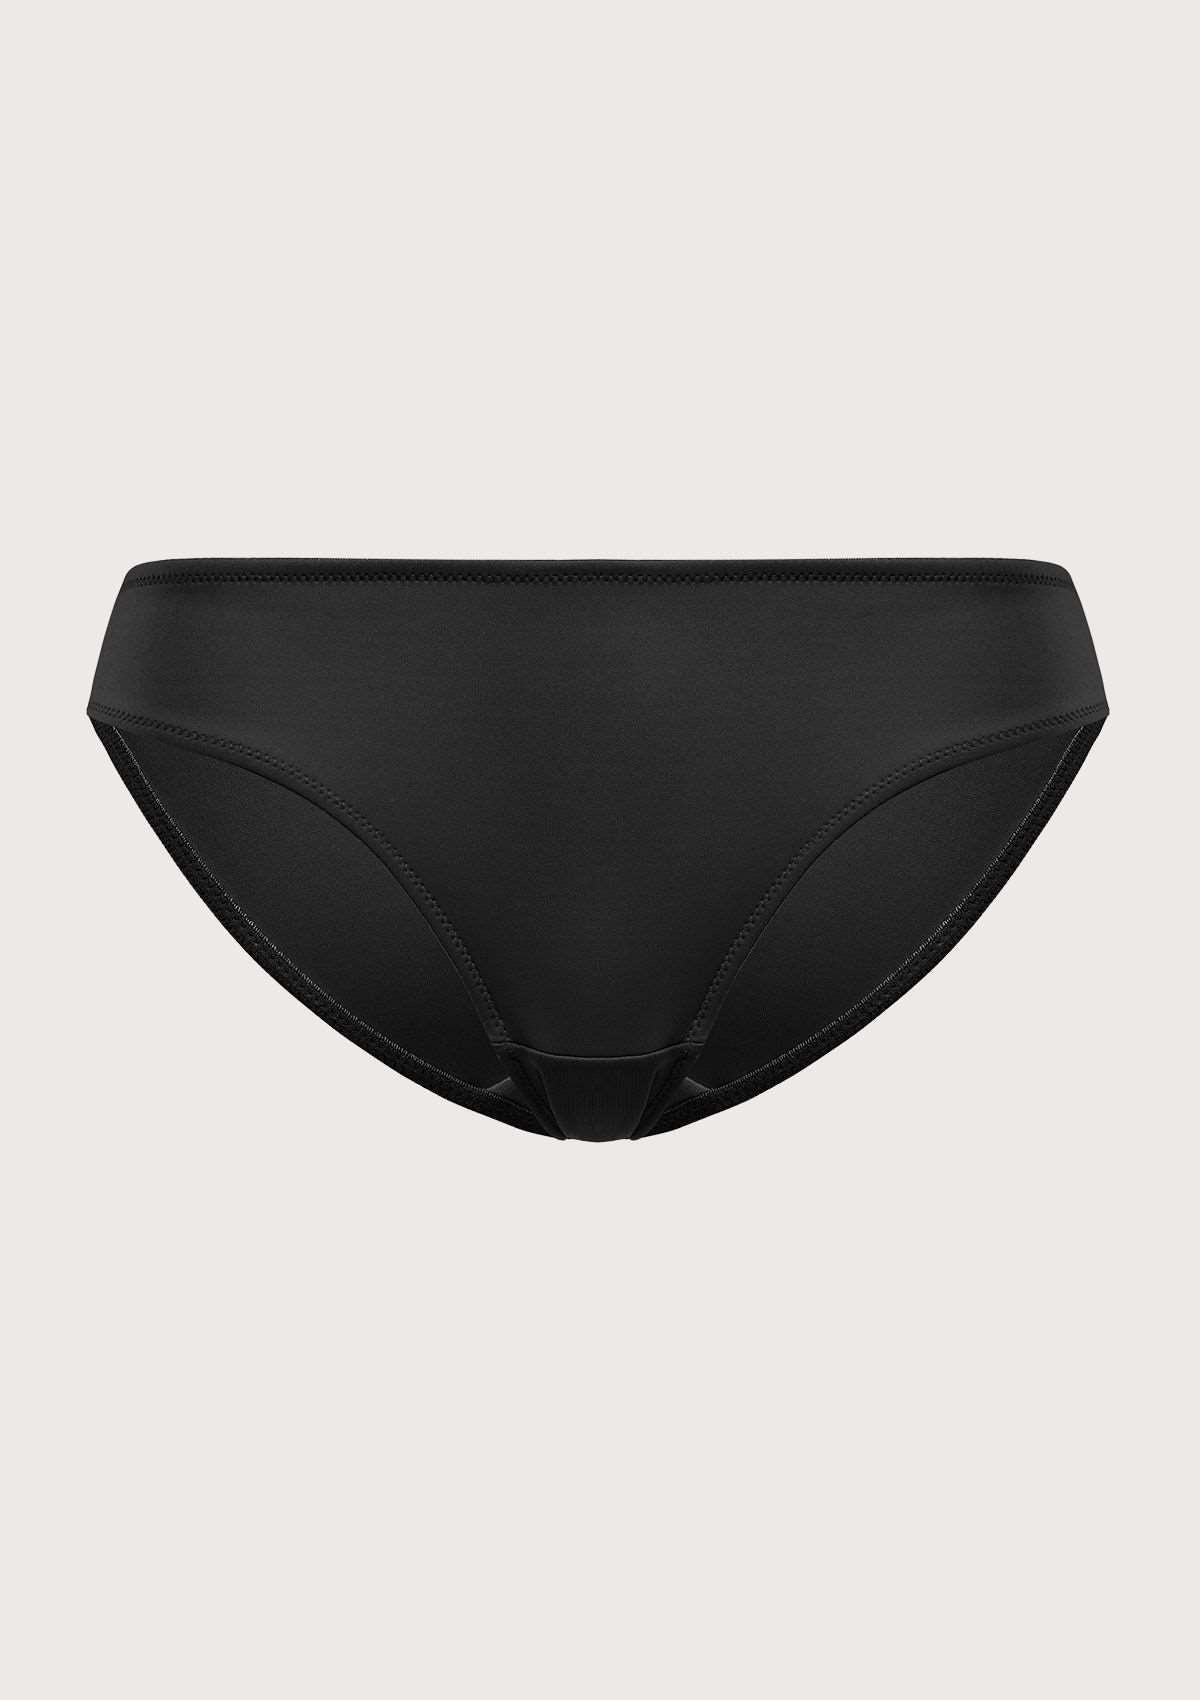 HSIA Patricia Smooth Classic Soft Stretch Panty - Everyday Comfort - XL / Black